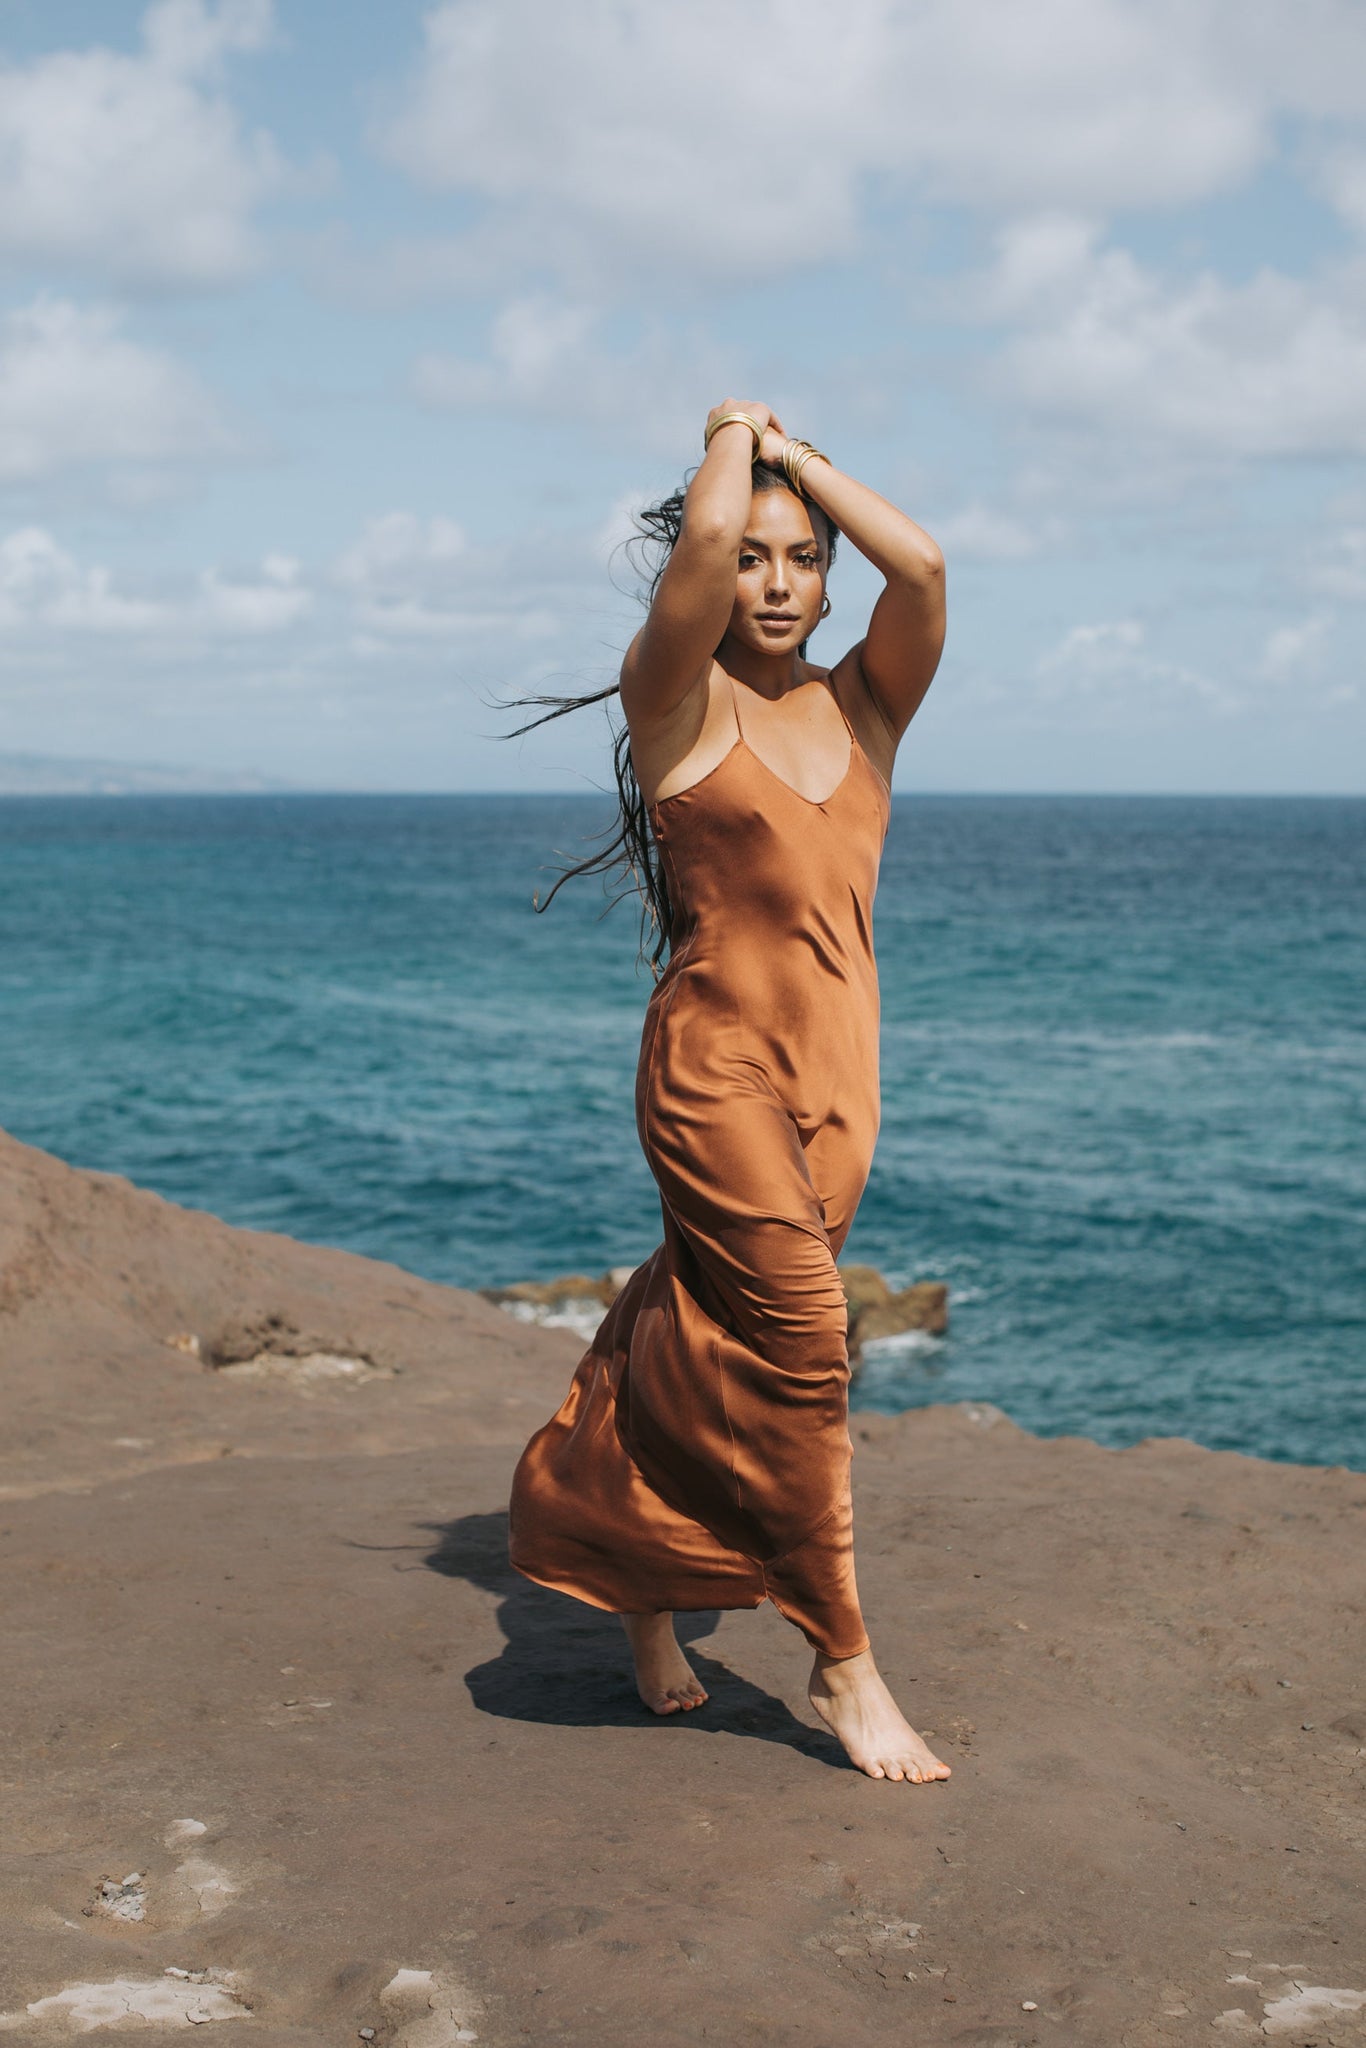 Long slip dress made with organic mulberry silk dyed to a rich caramelized brown.